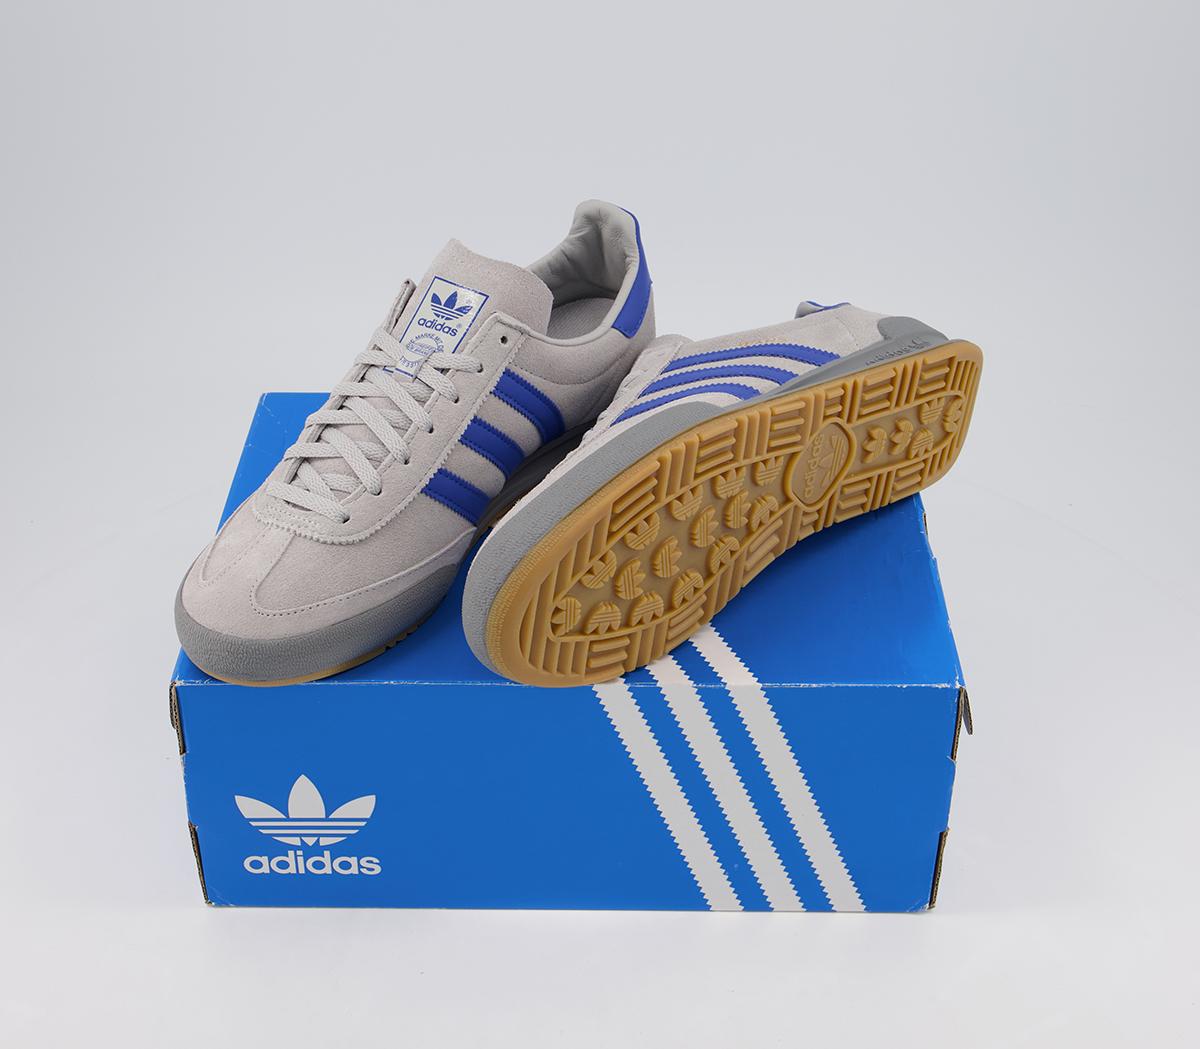 adidas Jeans Trainers Grey Blue - His trainers